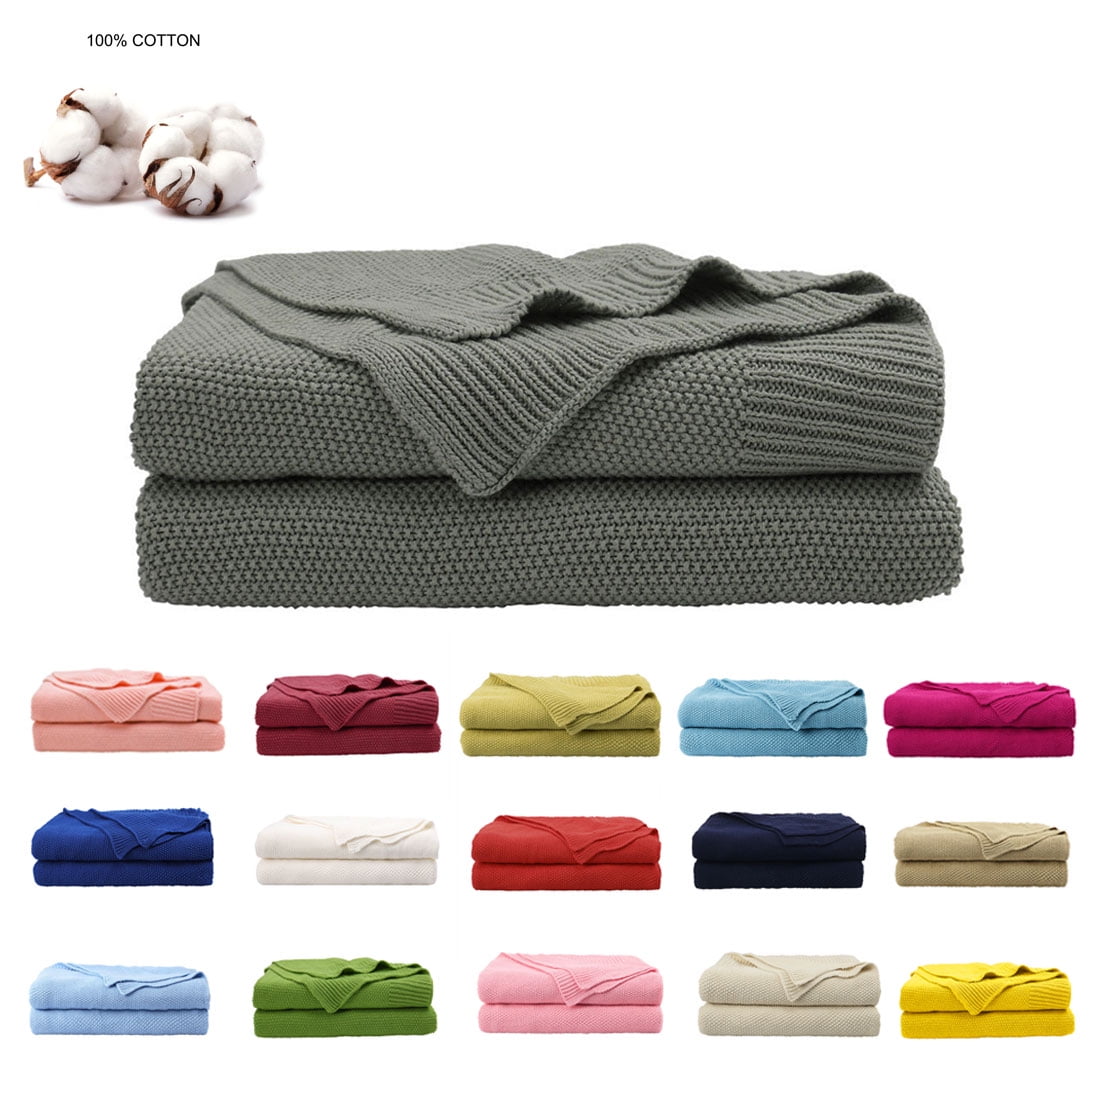 Details about   Cotton Soft Knitted Blanket Pom Pom Sofa Bed Throw Couch Settee Towel Home Decor 